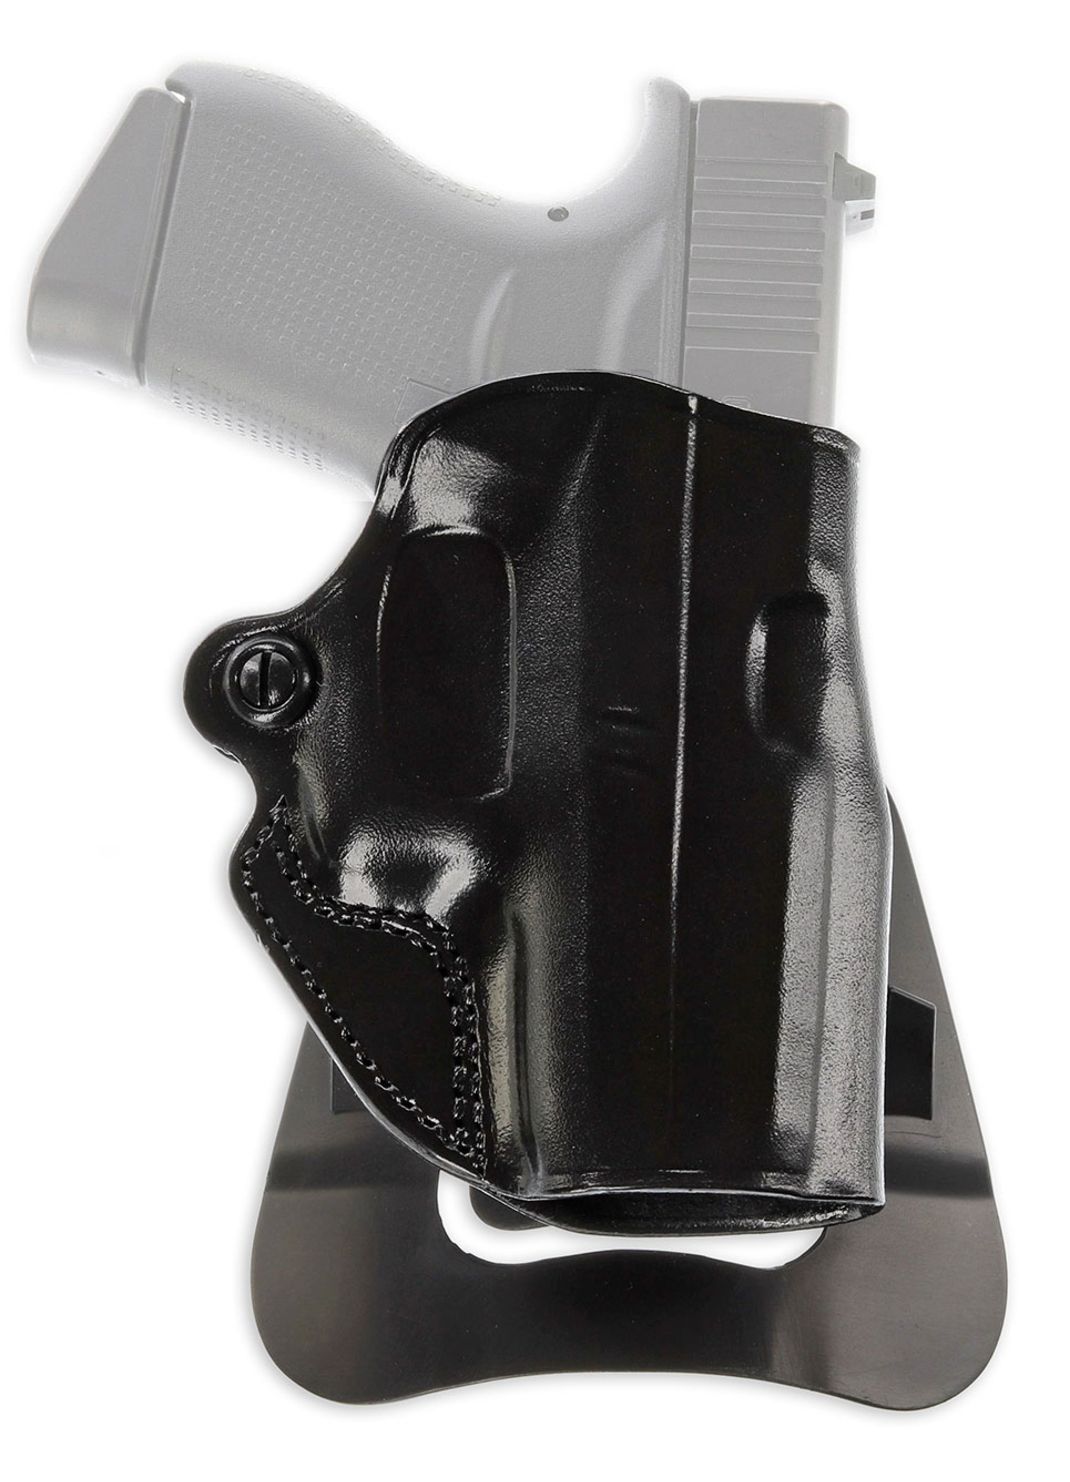 Galco Speed Master 2.0 Paddle/Belt Holster Kahr Arms CW9/Kahr Arms P9: SM2-604B